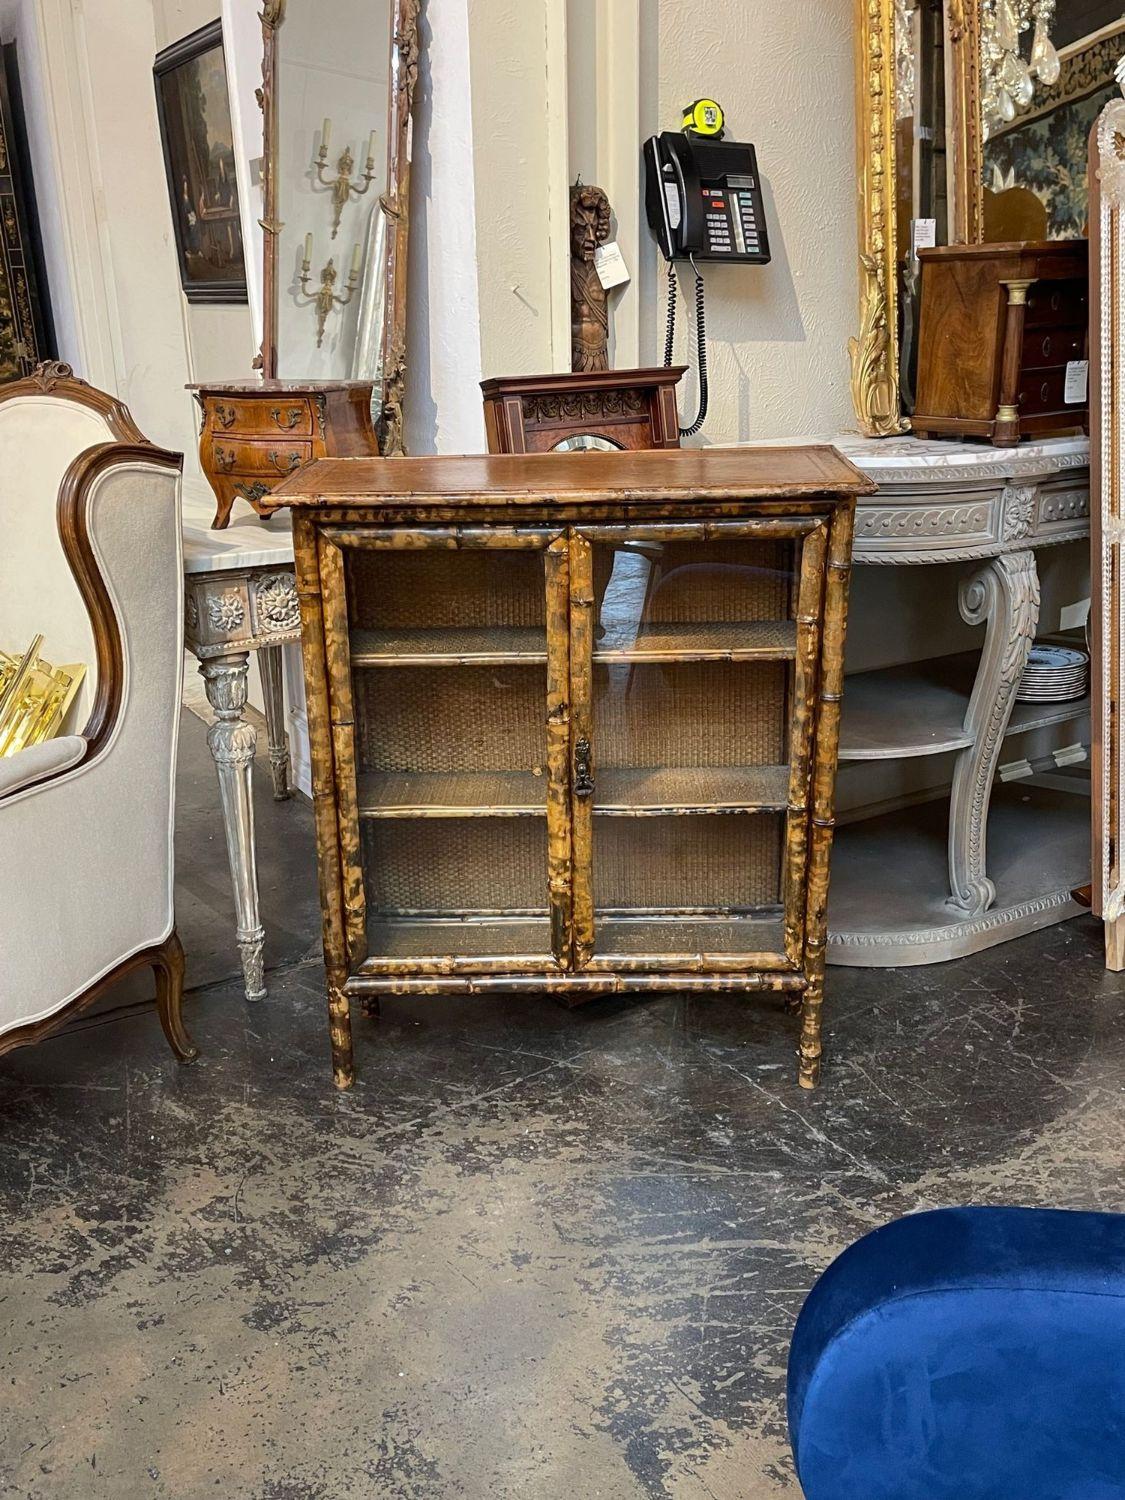 Very nice 19th century English narrow bamboo cabinet with embossed leather. Interesting patina and 3 shelves for storage. A lovely and unique piece!